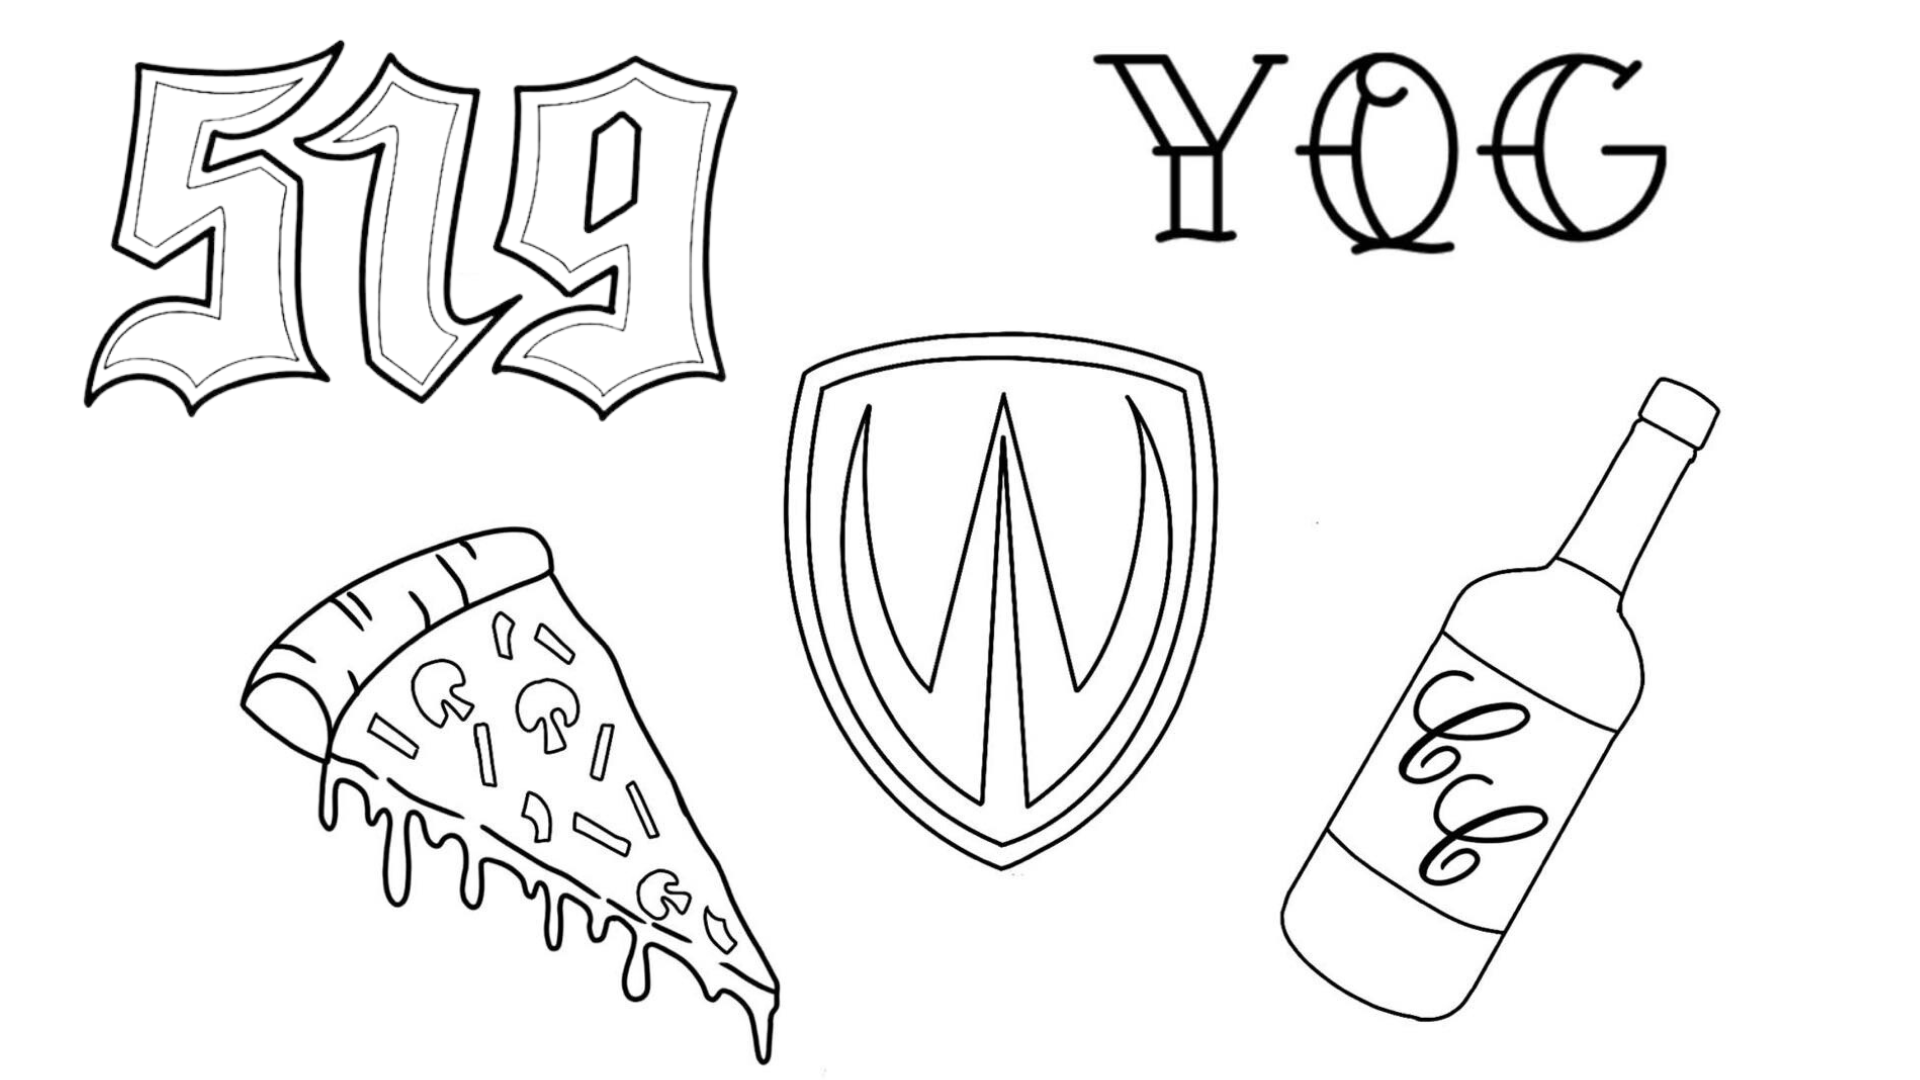 Some sample Windsor-themed flash tattoos that will be available at the 519 Day Party at WindsorEats in Windsor, Ontario.